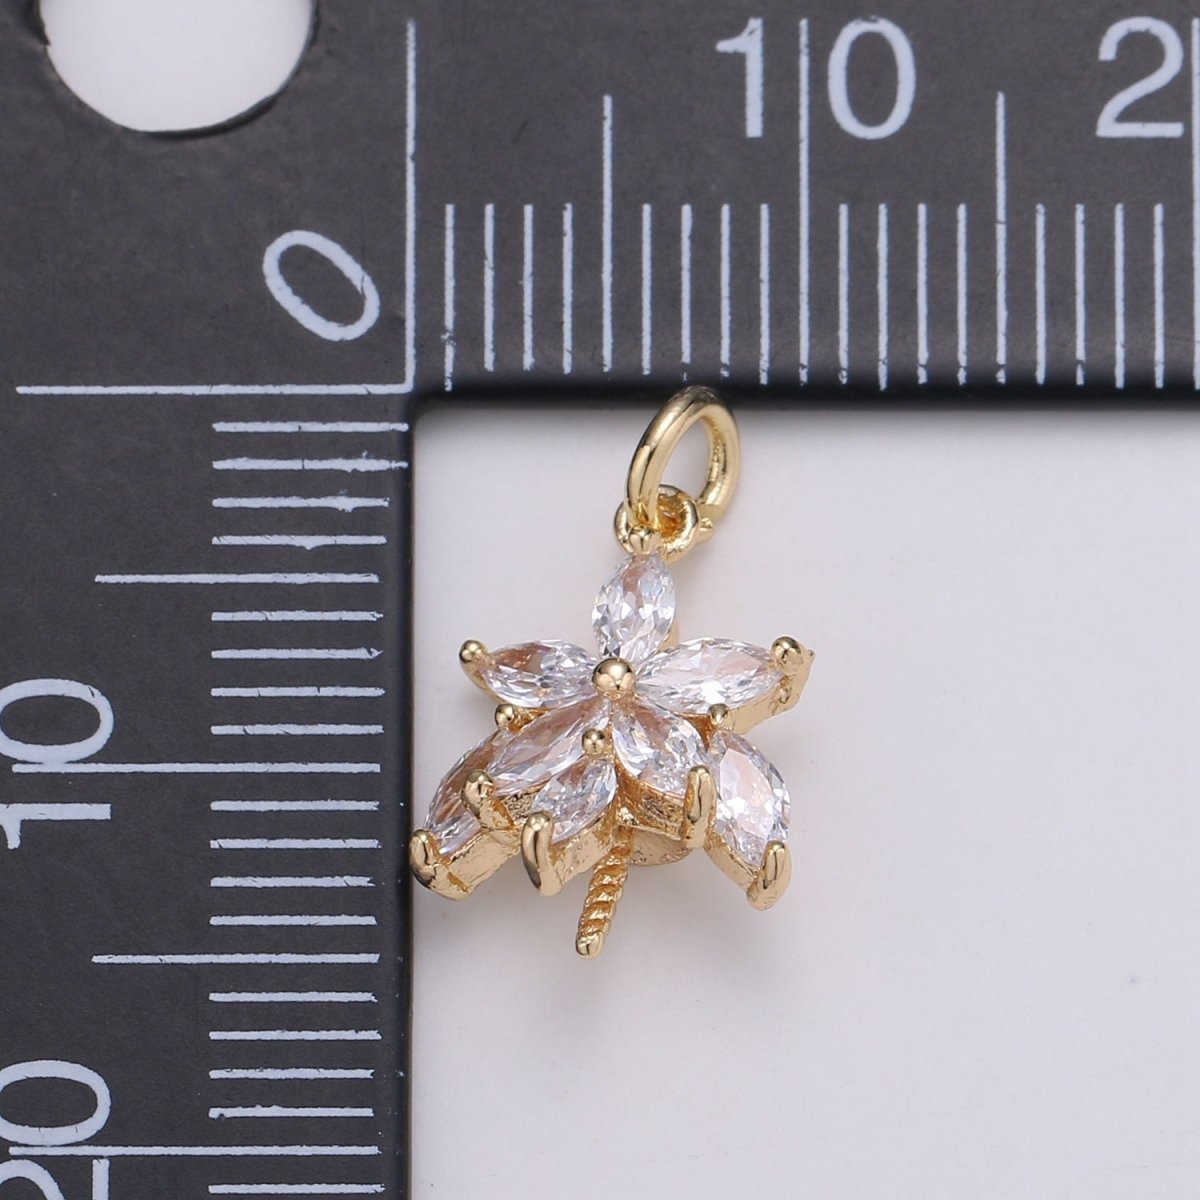 Tiny Small 18K Gold Filled Flower Charm Pave CZ Cubic Zirconia Charm for Bracelet Necklace Earring Charm Supply L-071 - DLUXCA